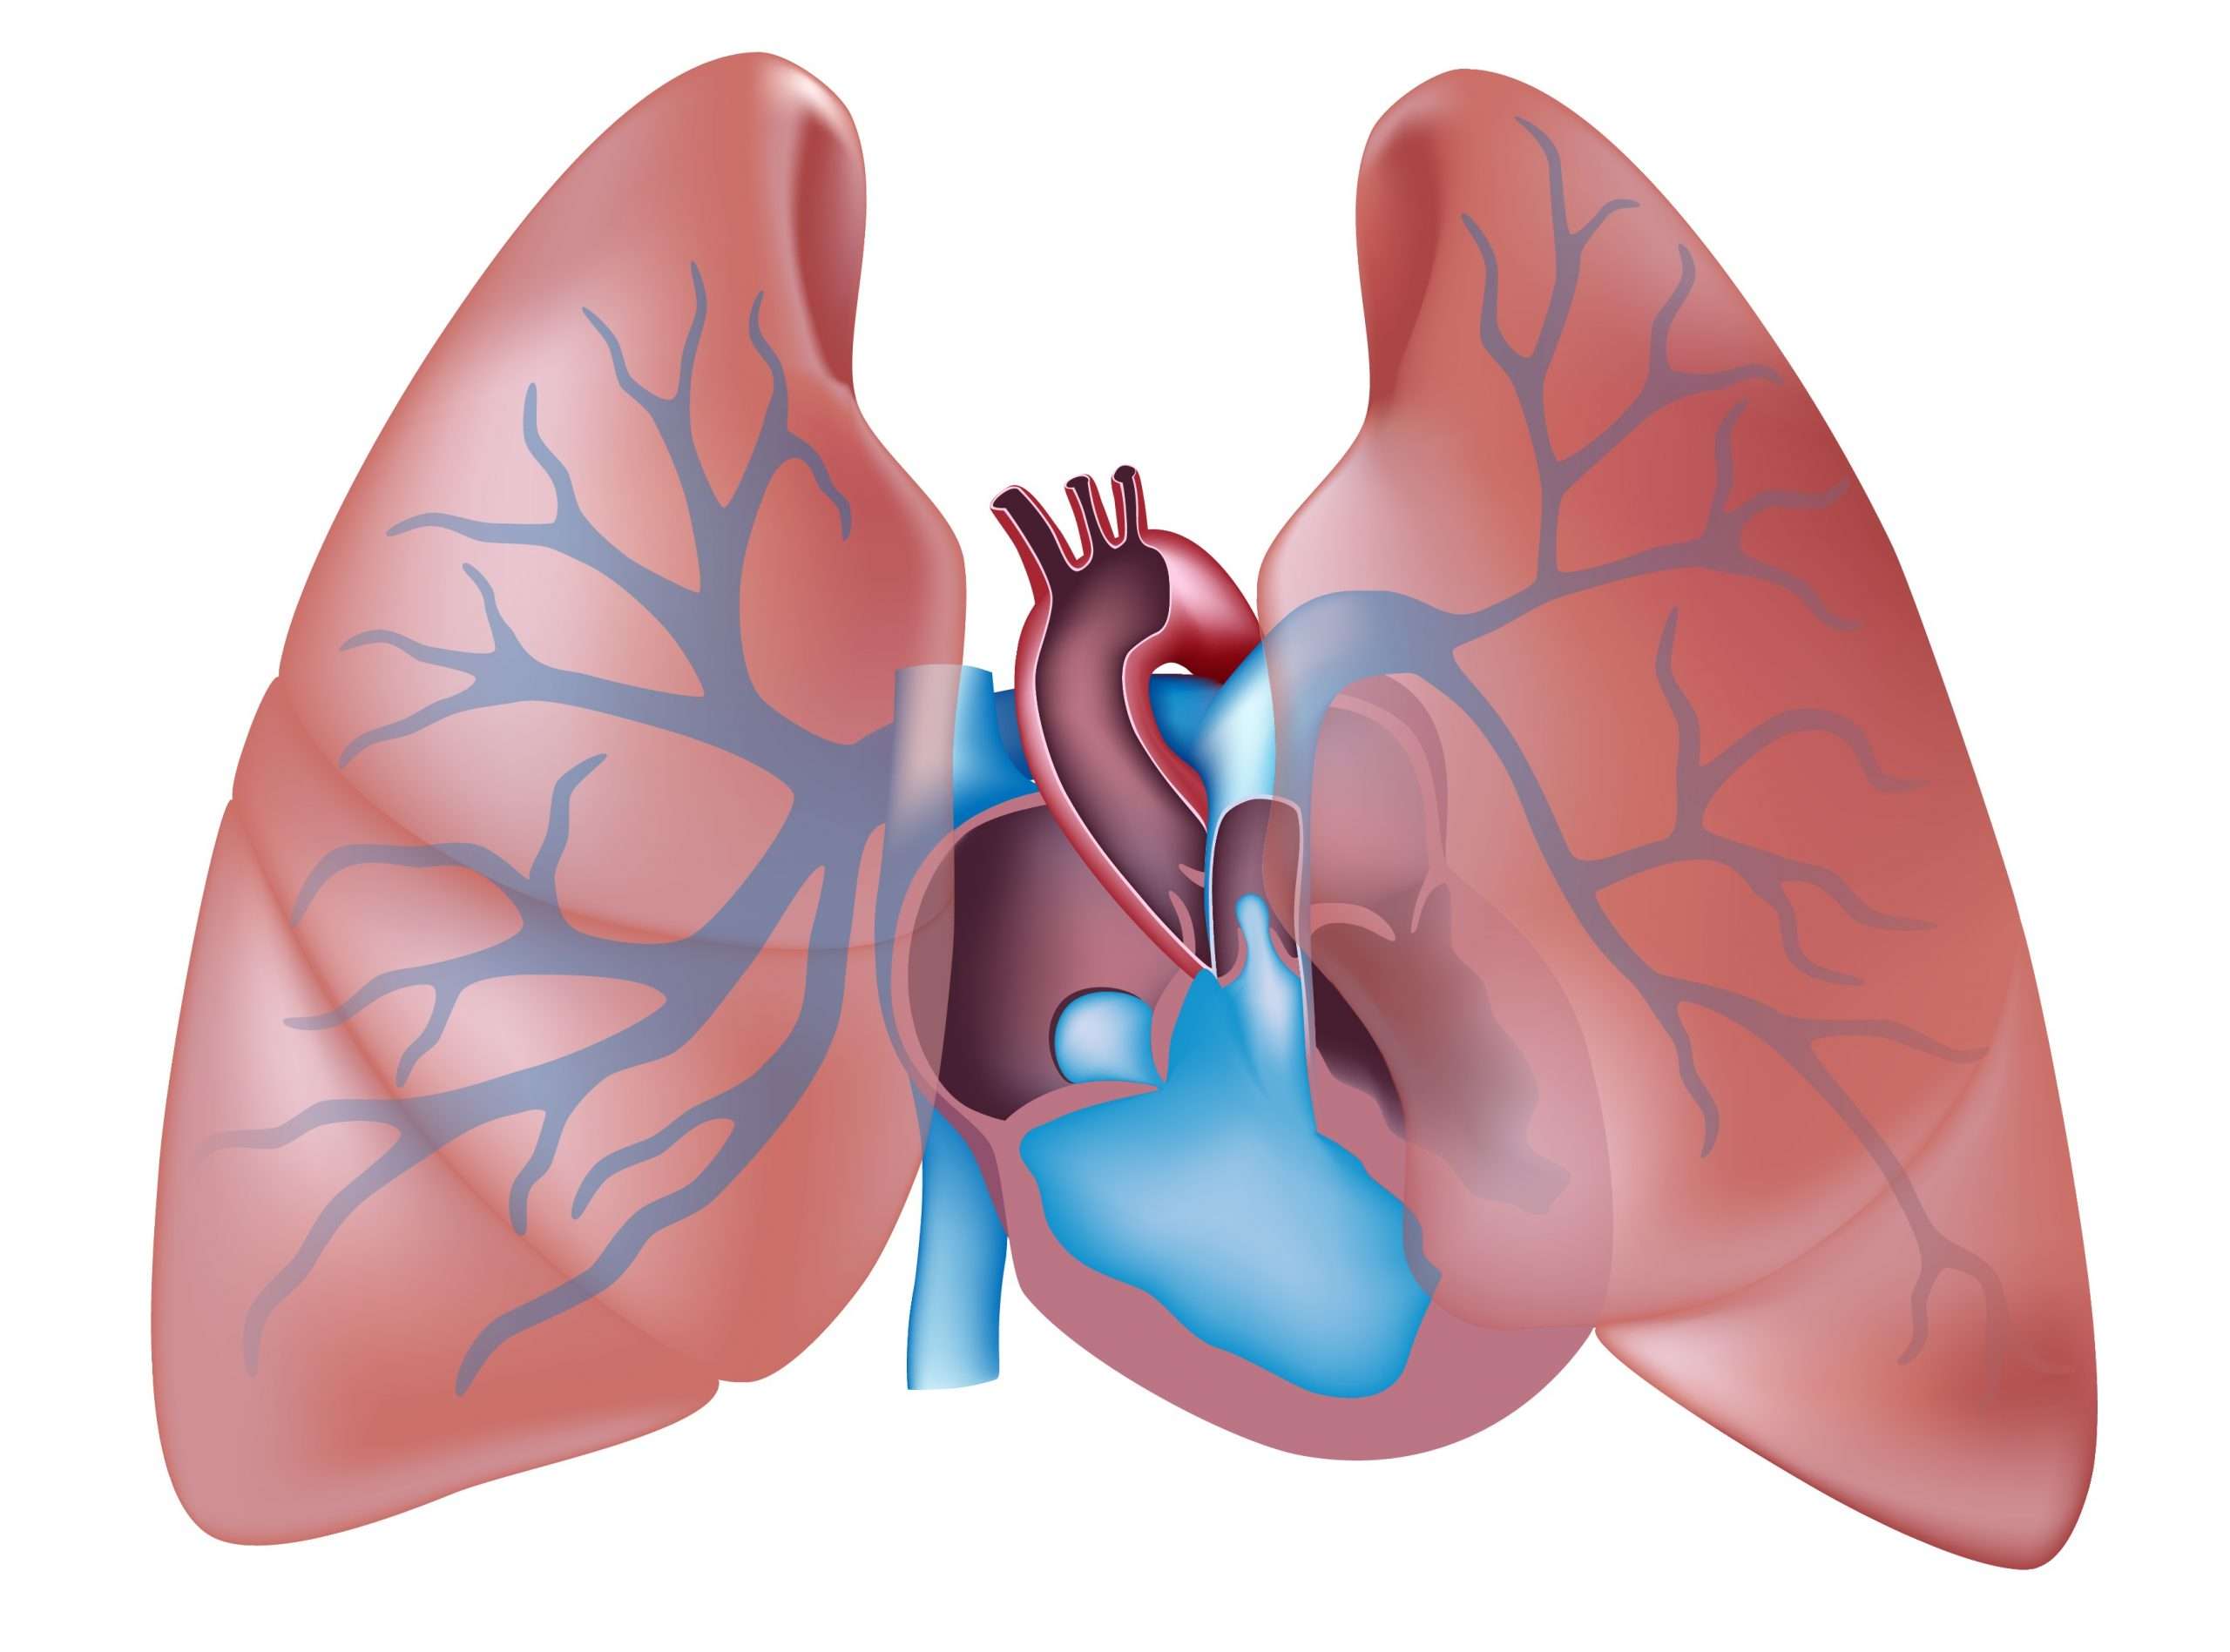 PDE5 Inhibitors Beneficial in WHO Group 1 Pulmonary Arterial ...